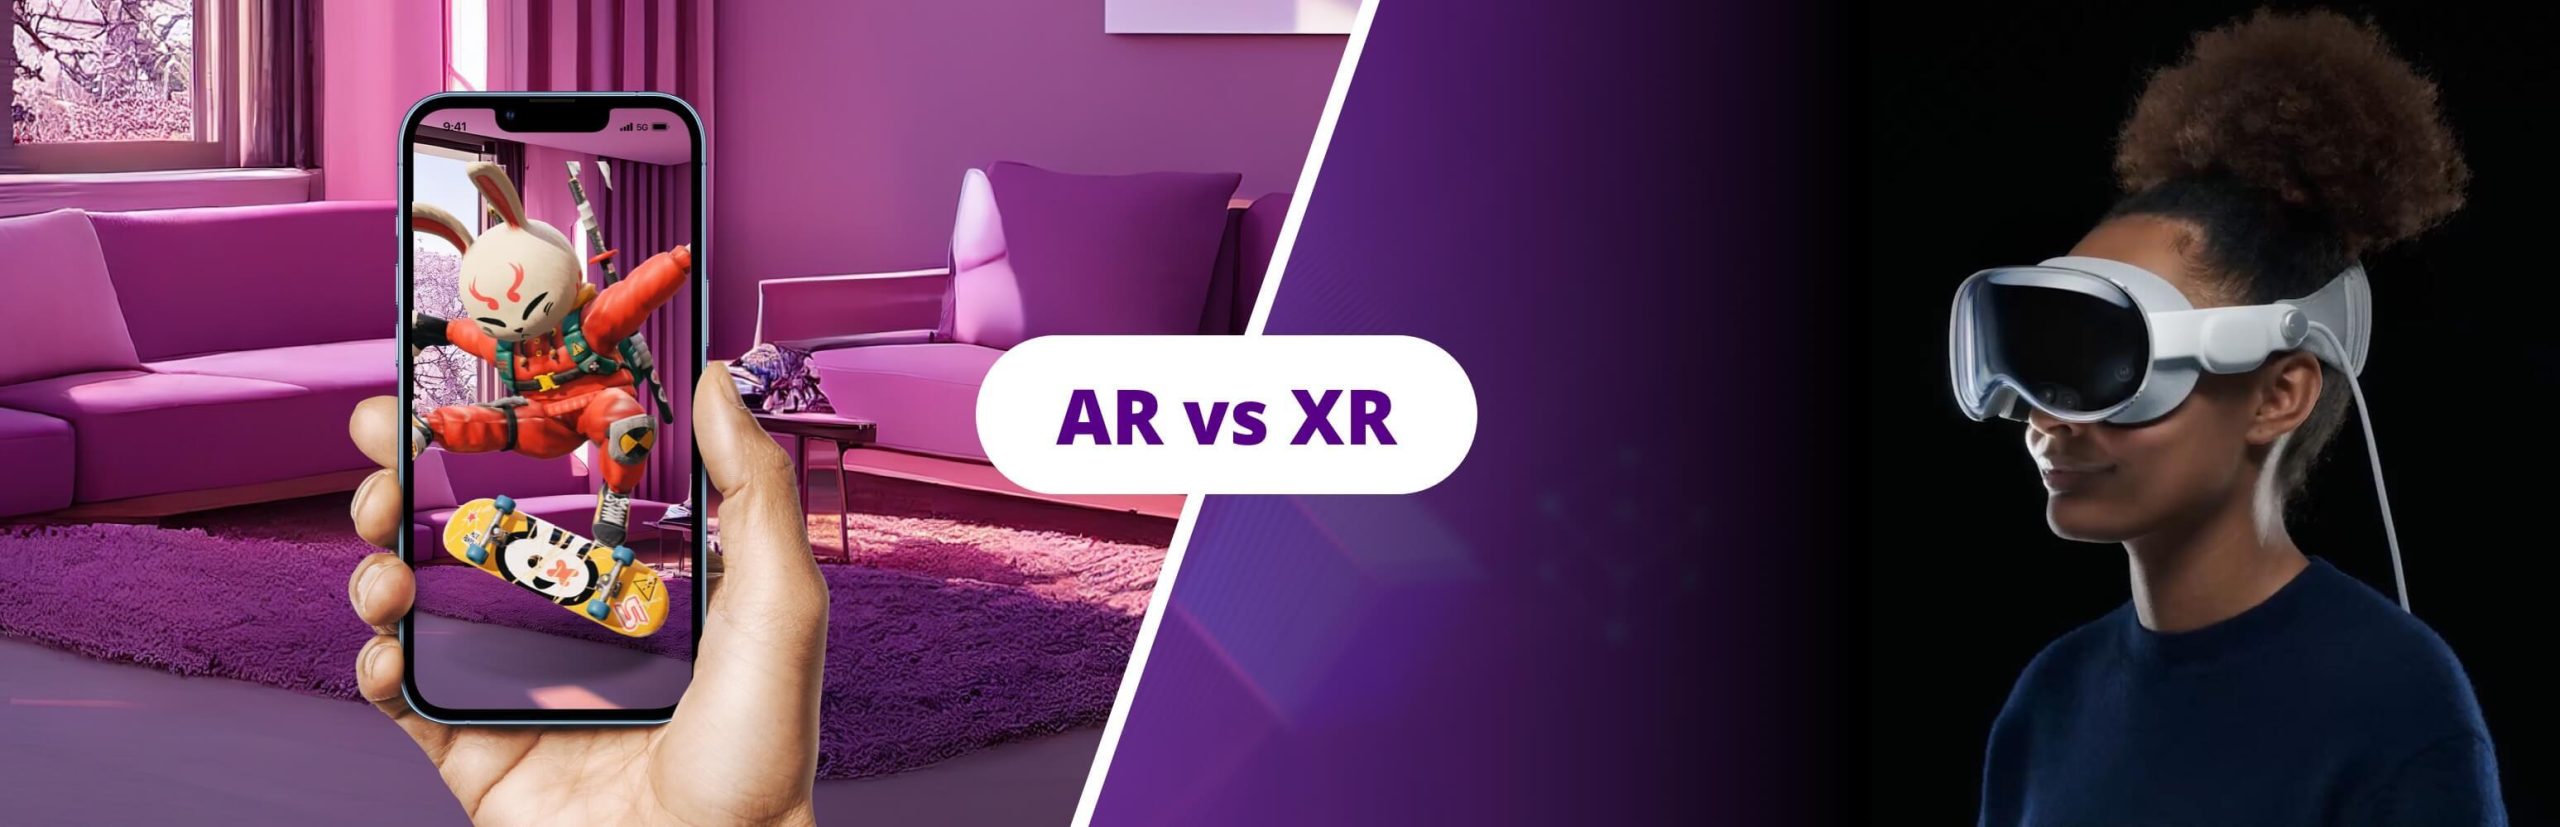 AR vs XR: Key differences between Augmented Reality and Extended Reality explored